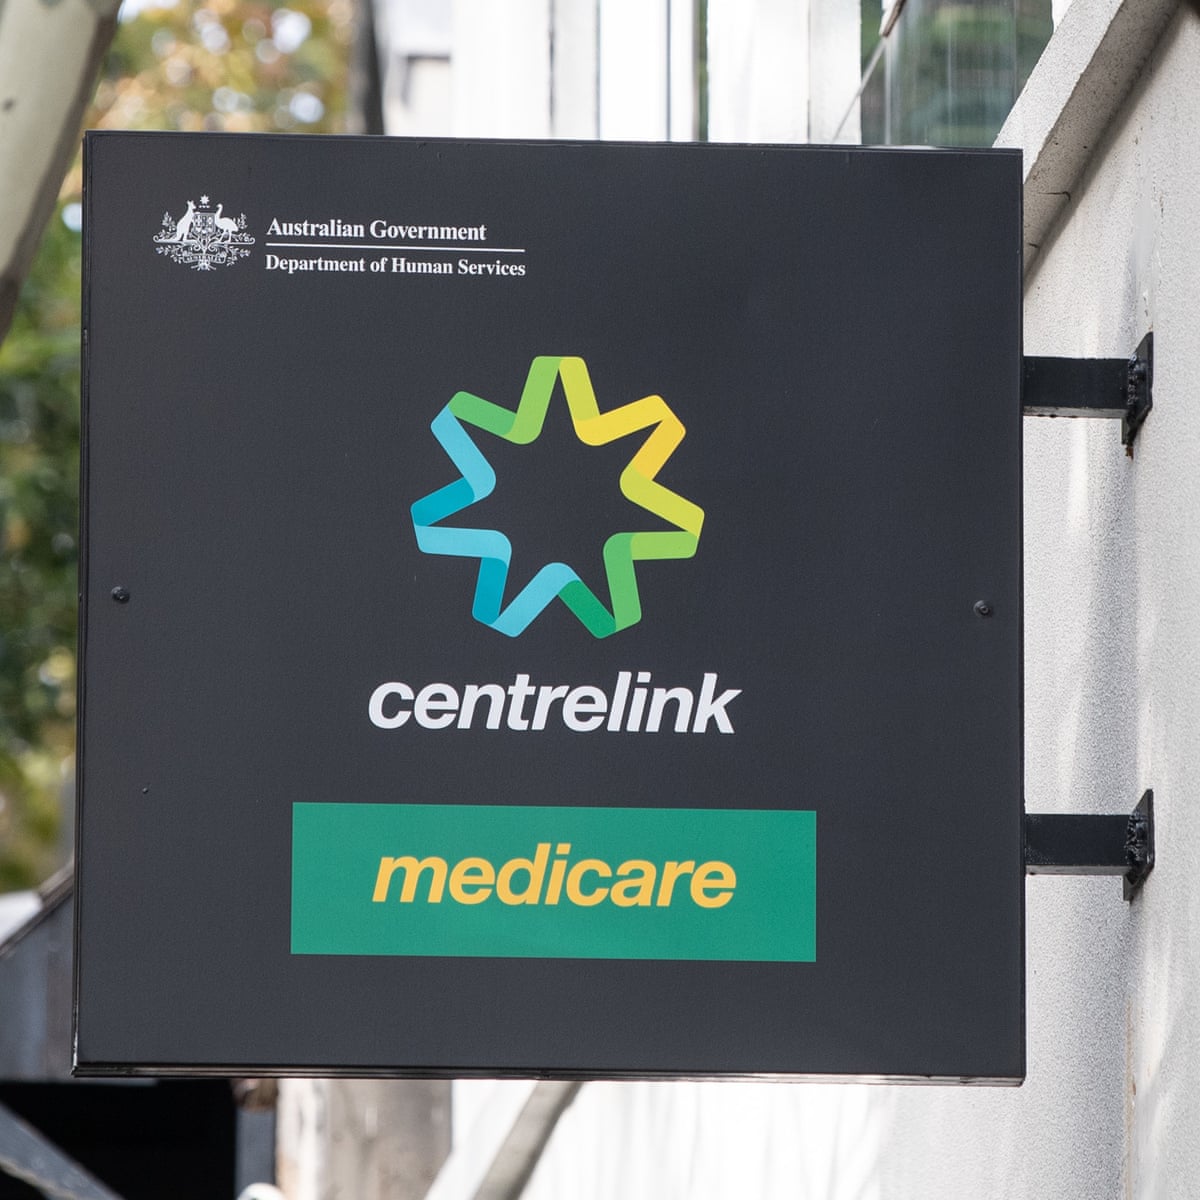 Centrelink staff forced to administer botched robodebt scheme deserve  apology, union says | Australia news | The Guardian